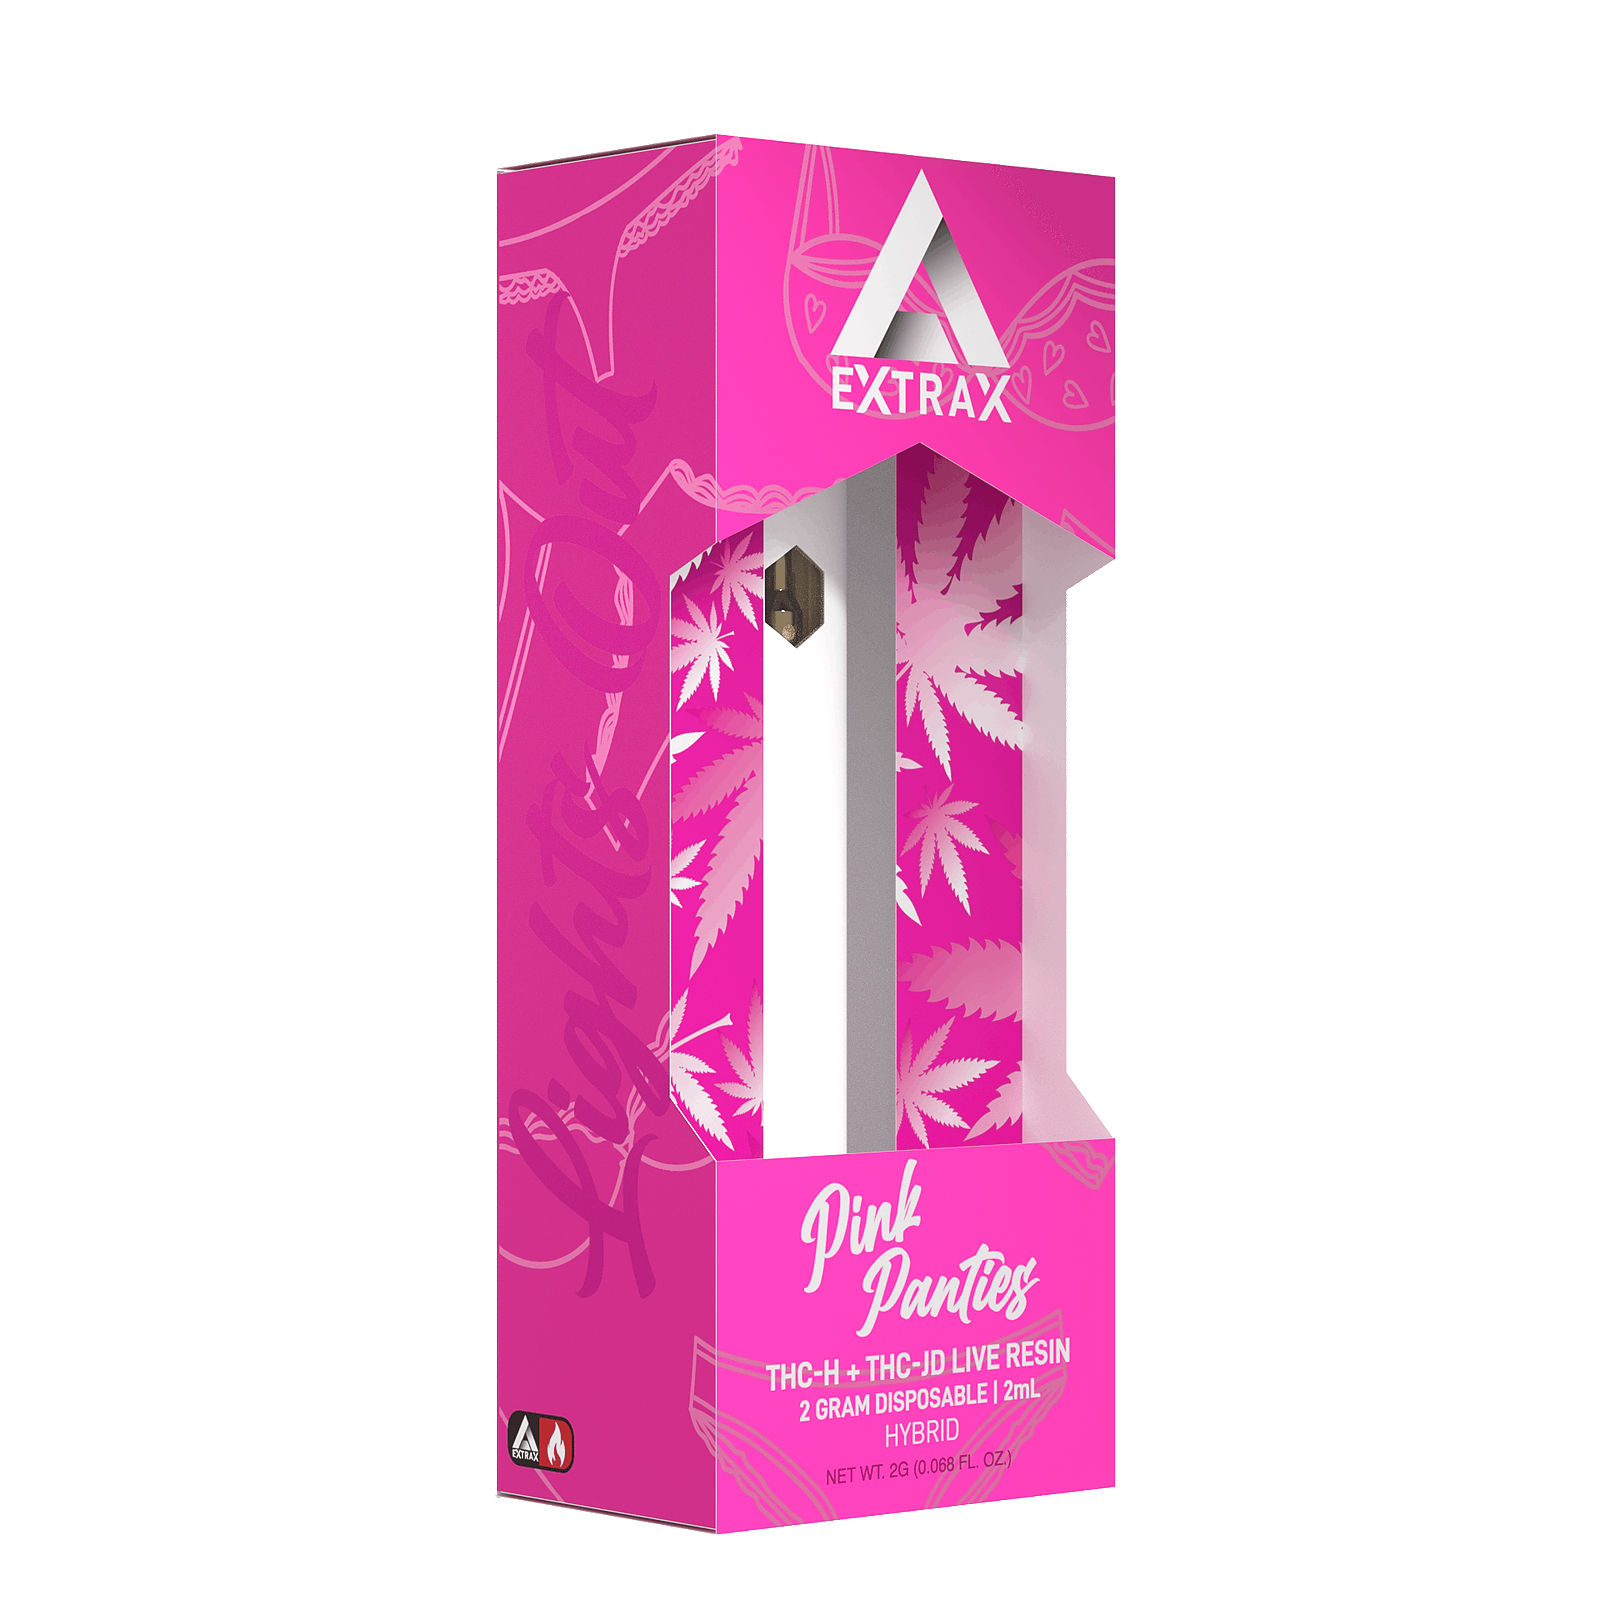 Delta Extrax Pink Panties Thch Thcjd Live Resin Disposable Leafly 1920